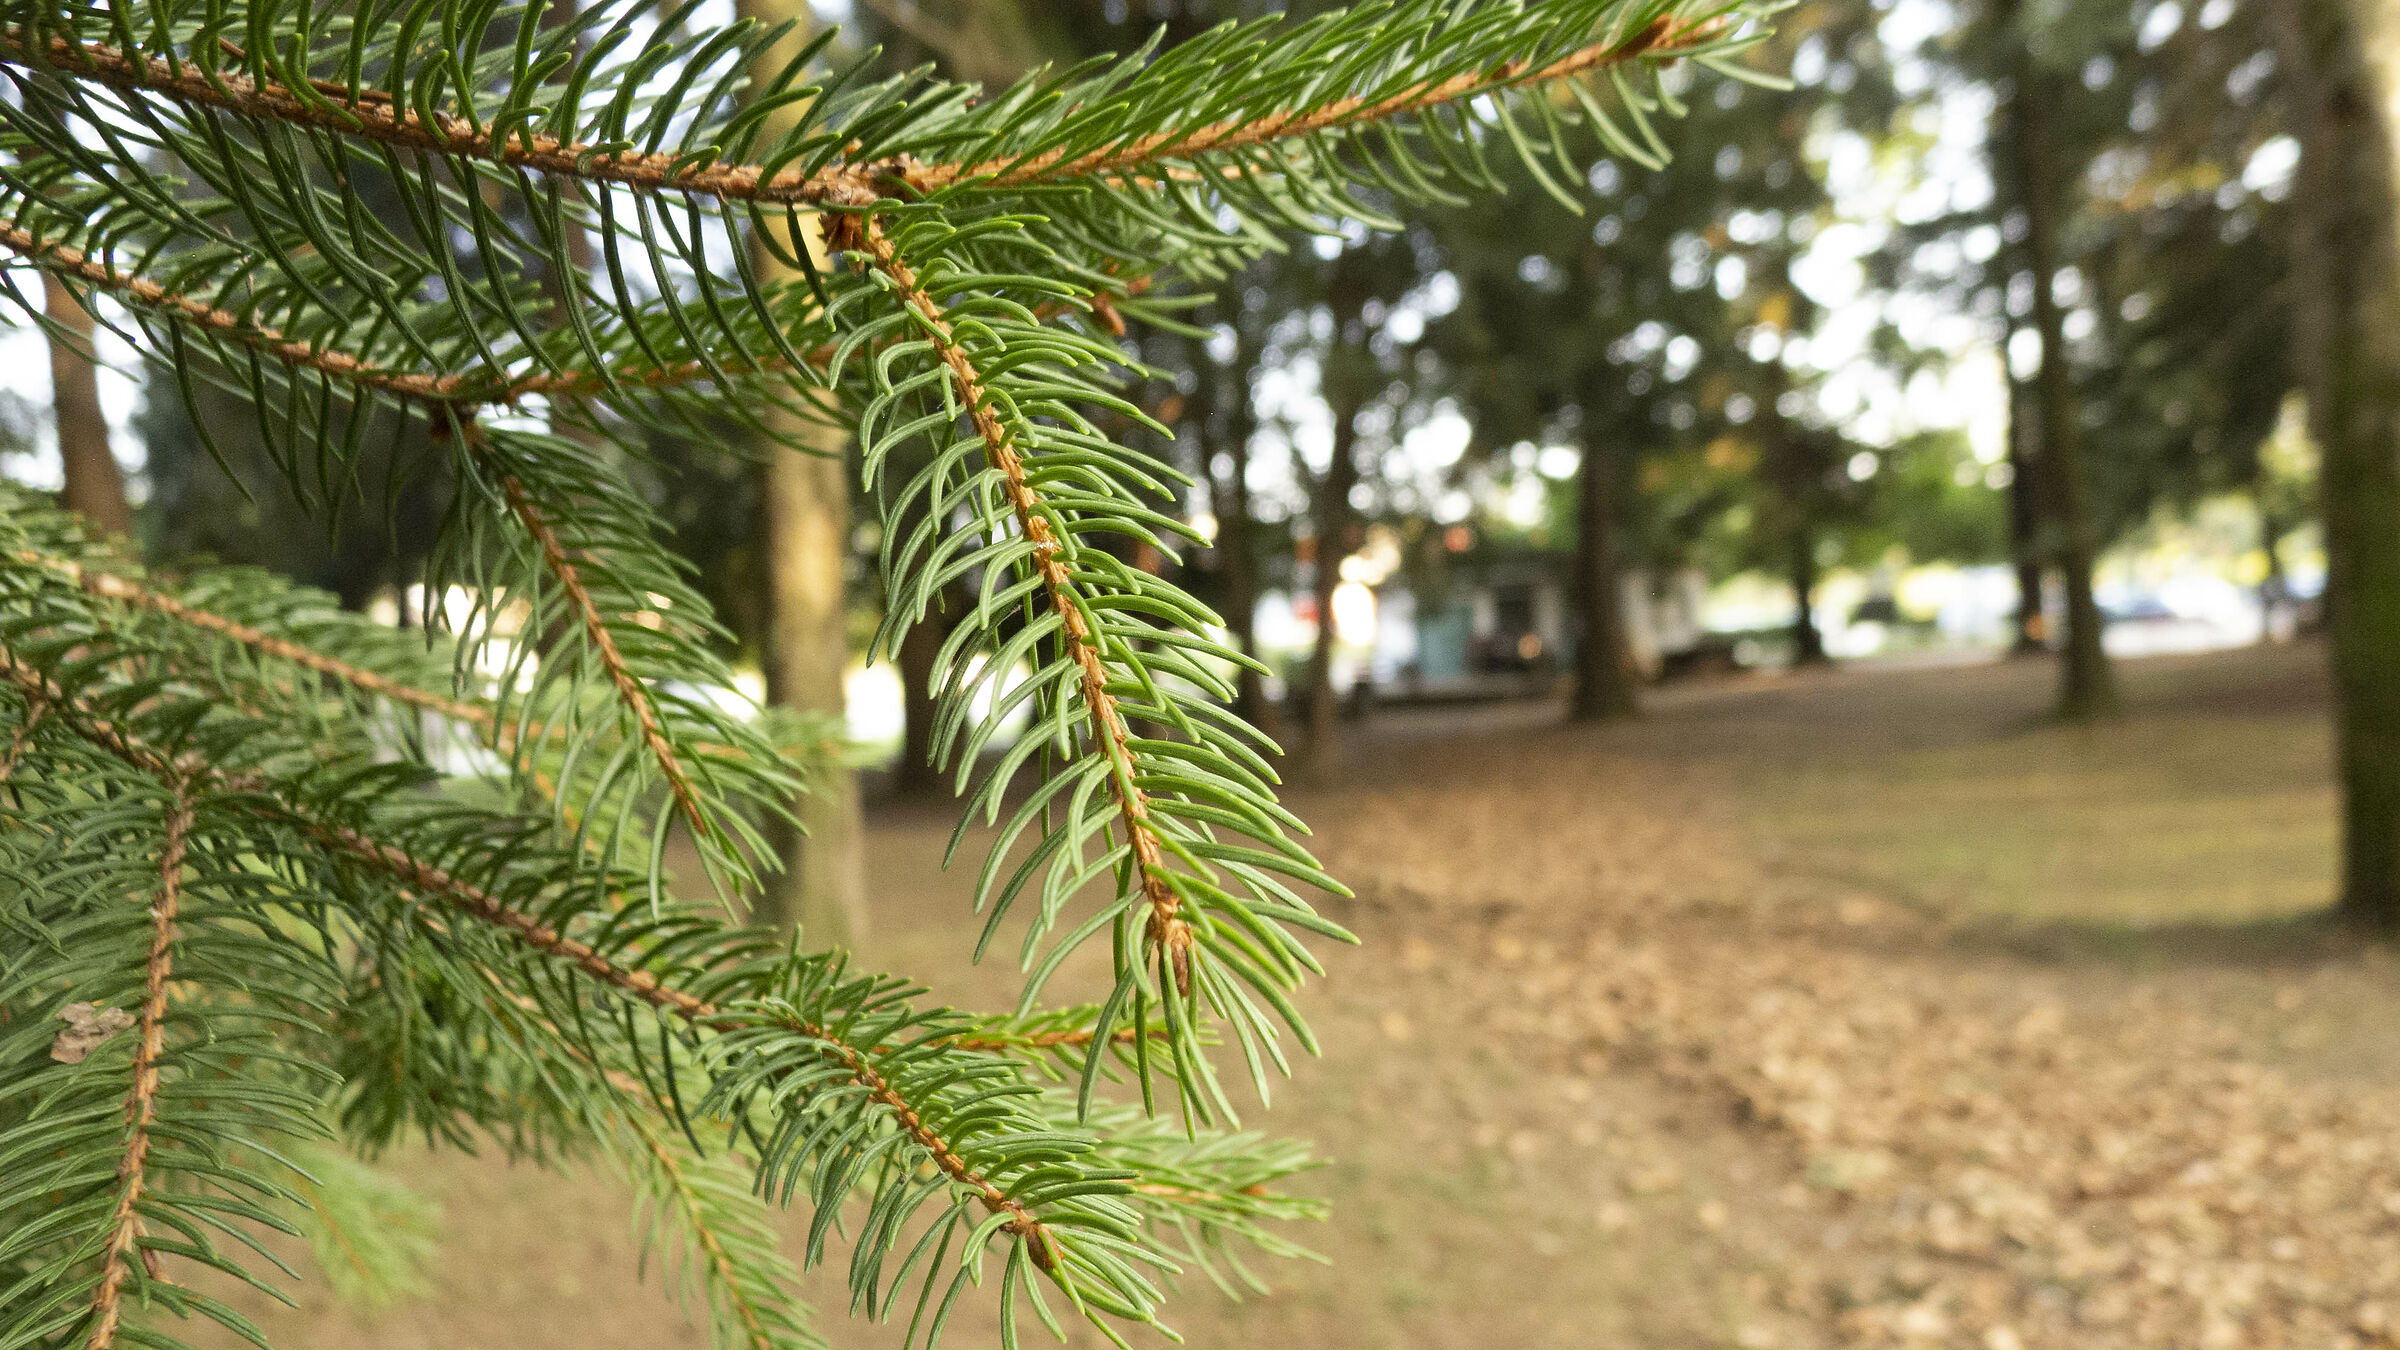 Pine needles in the park...